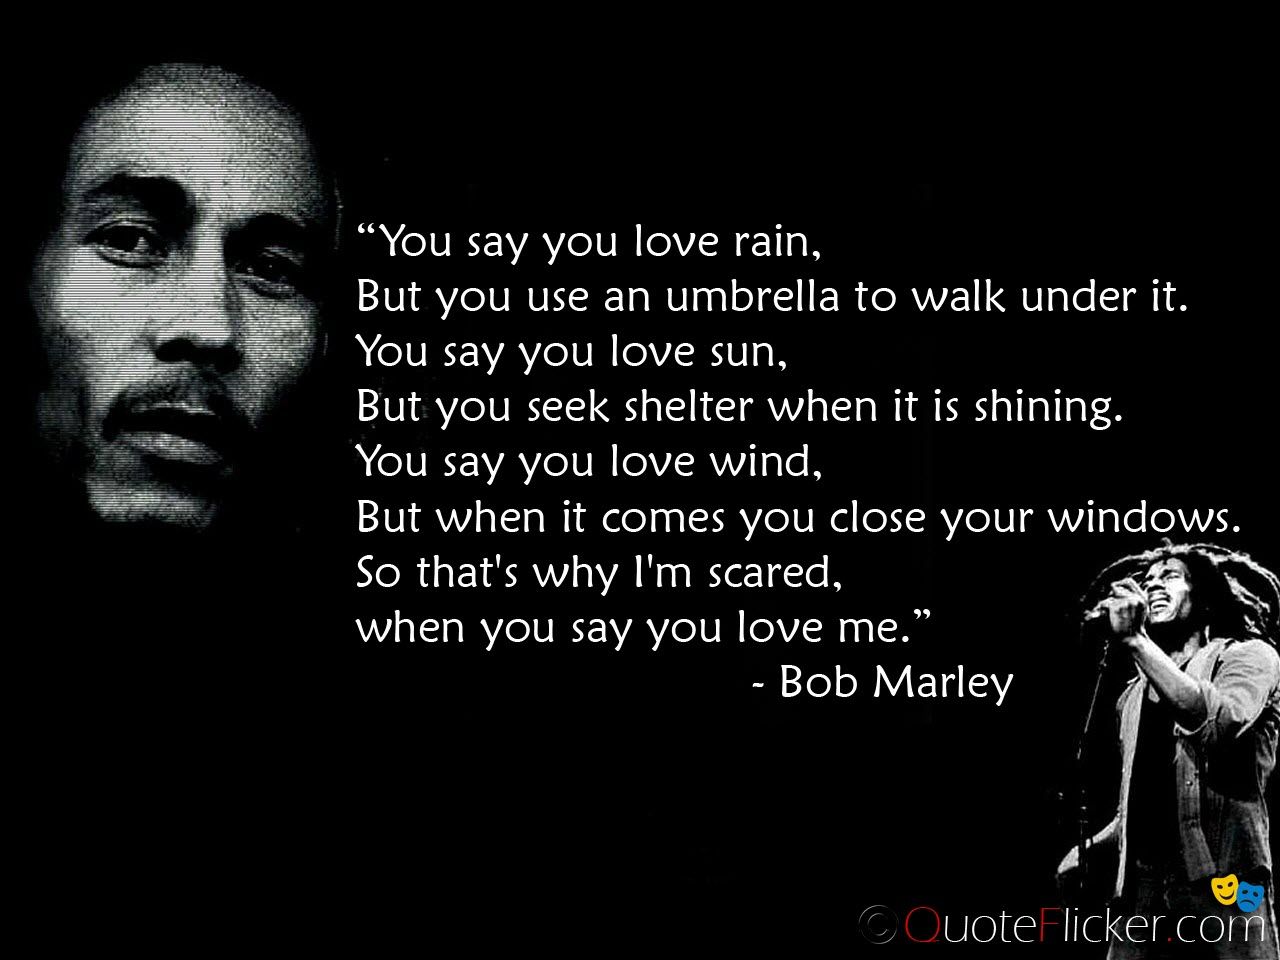 Bob Marley Quotes One Love One Heart One Destiny quotes HD